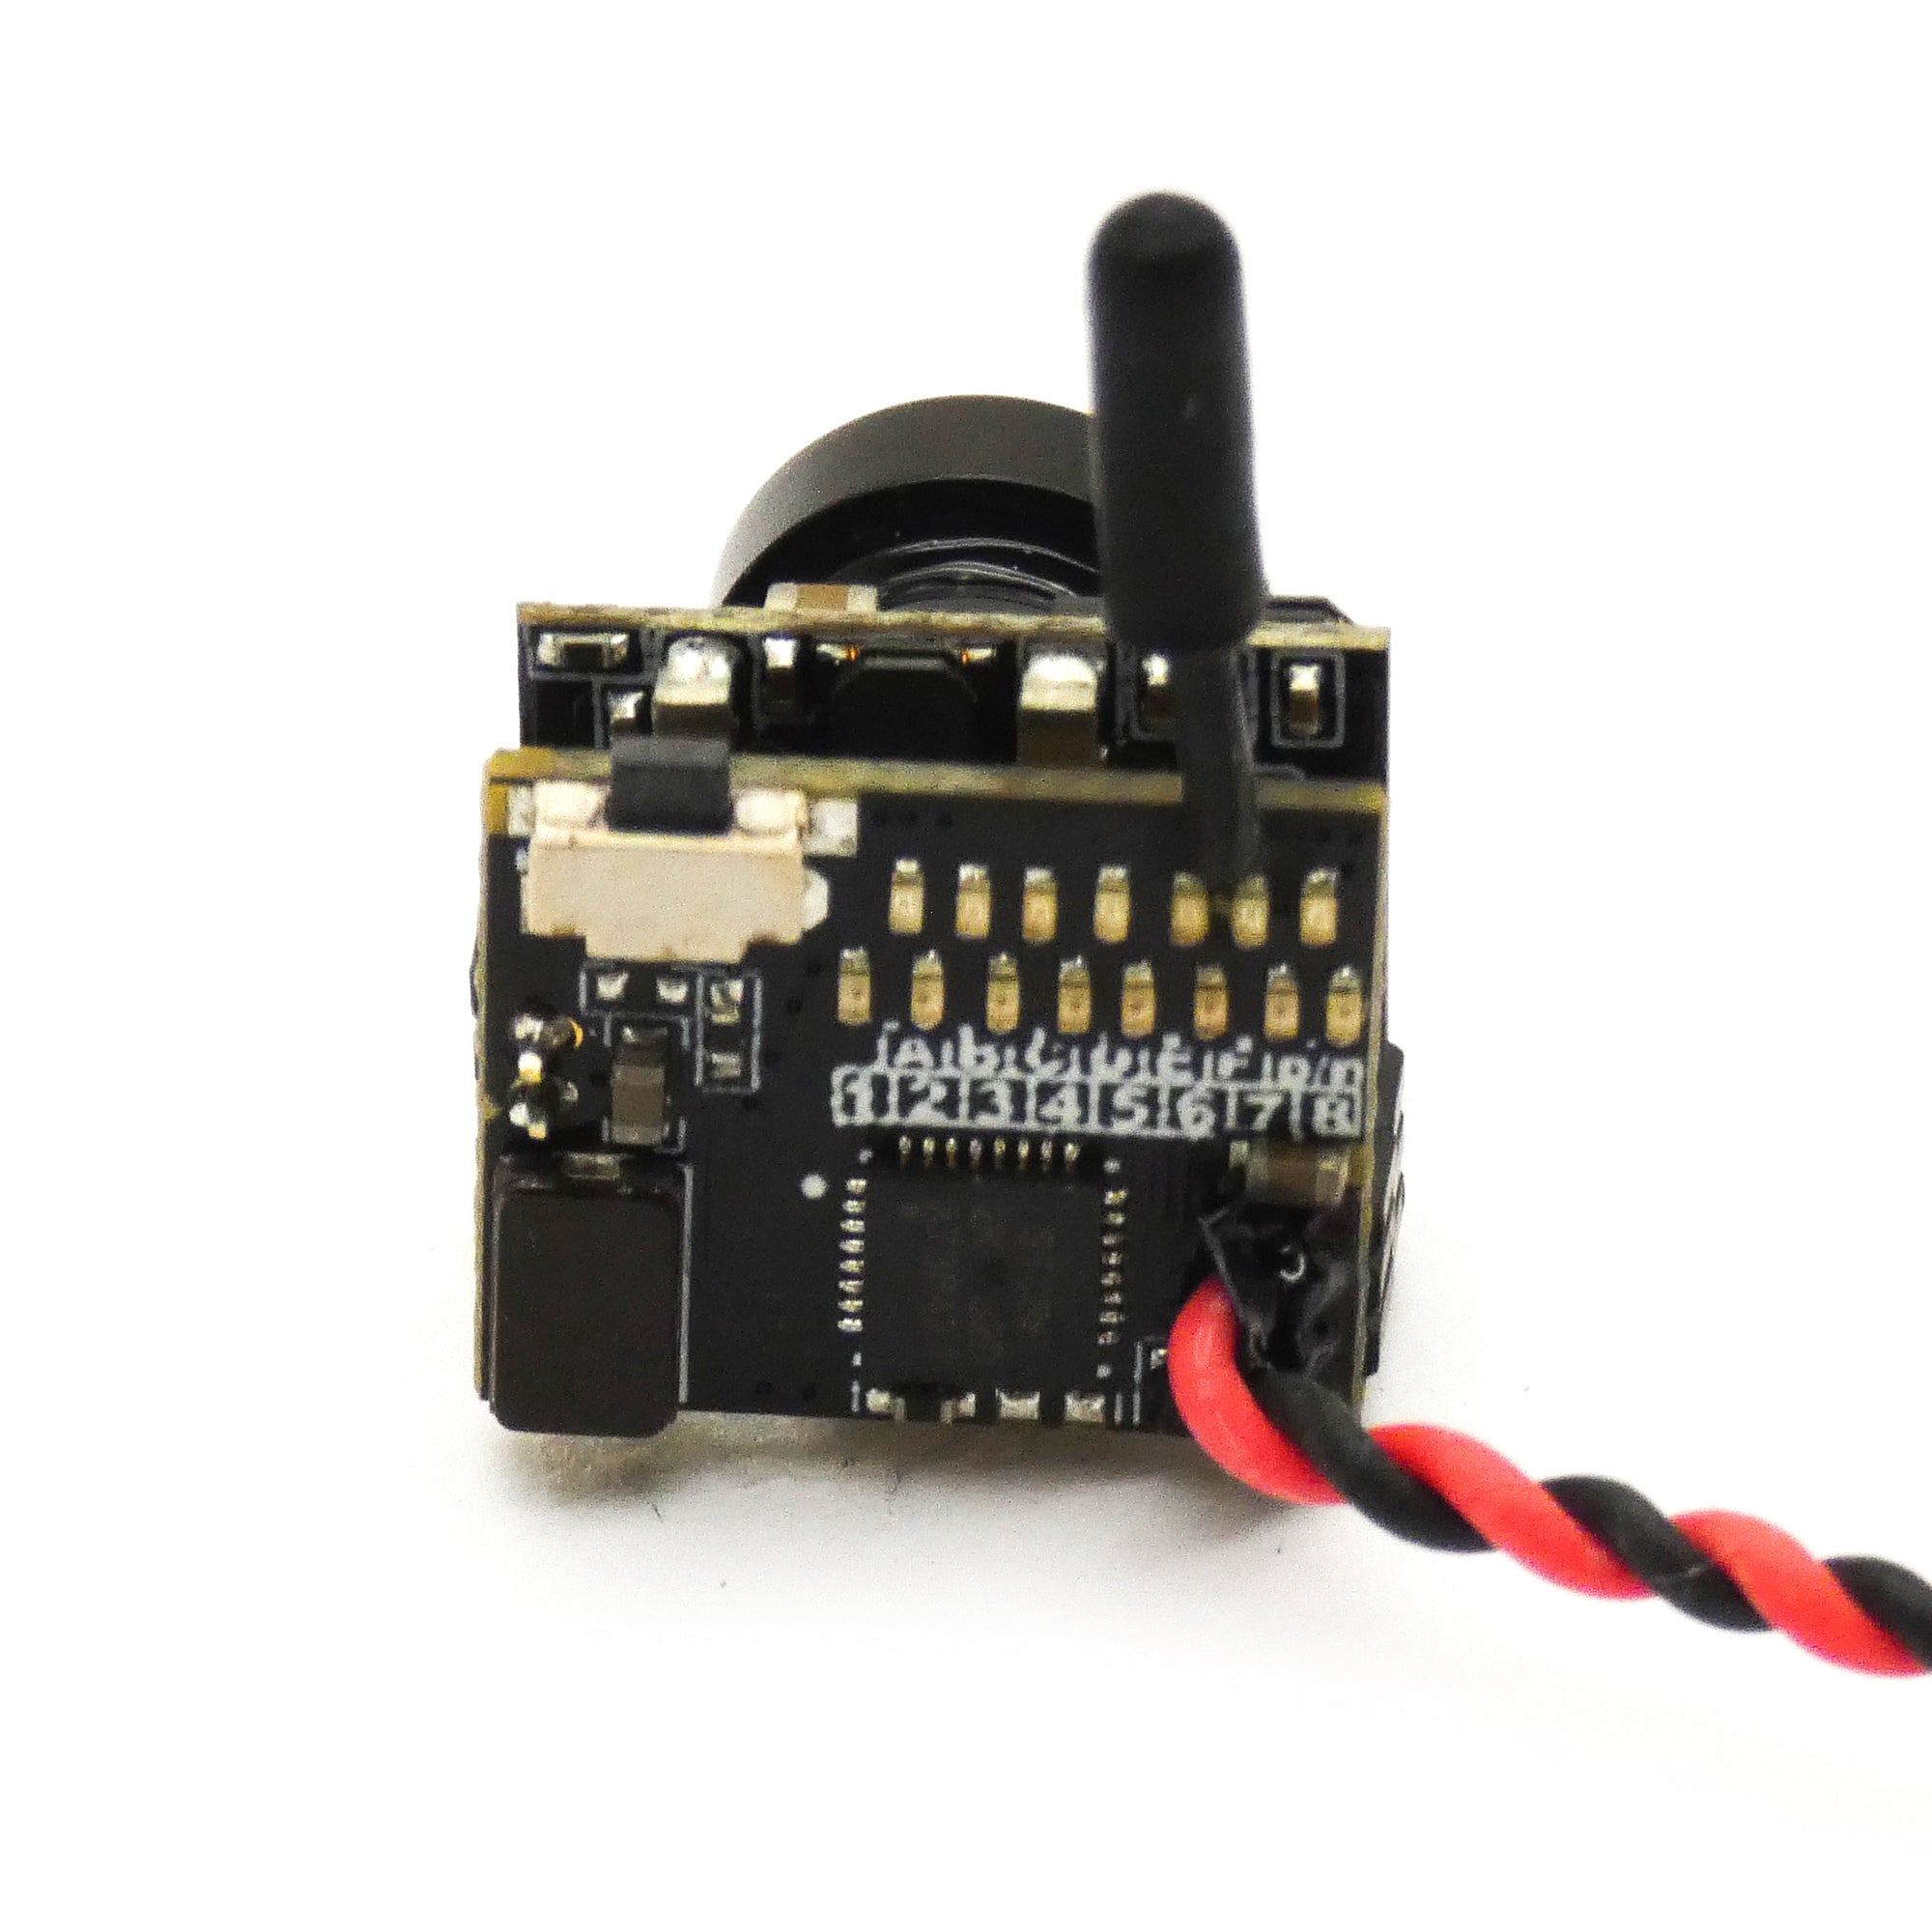 Micro FPV Camera Transmitter for Racing Drones